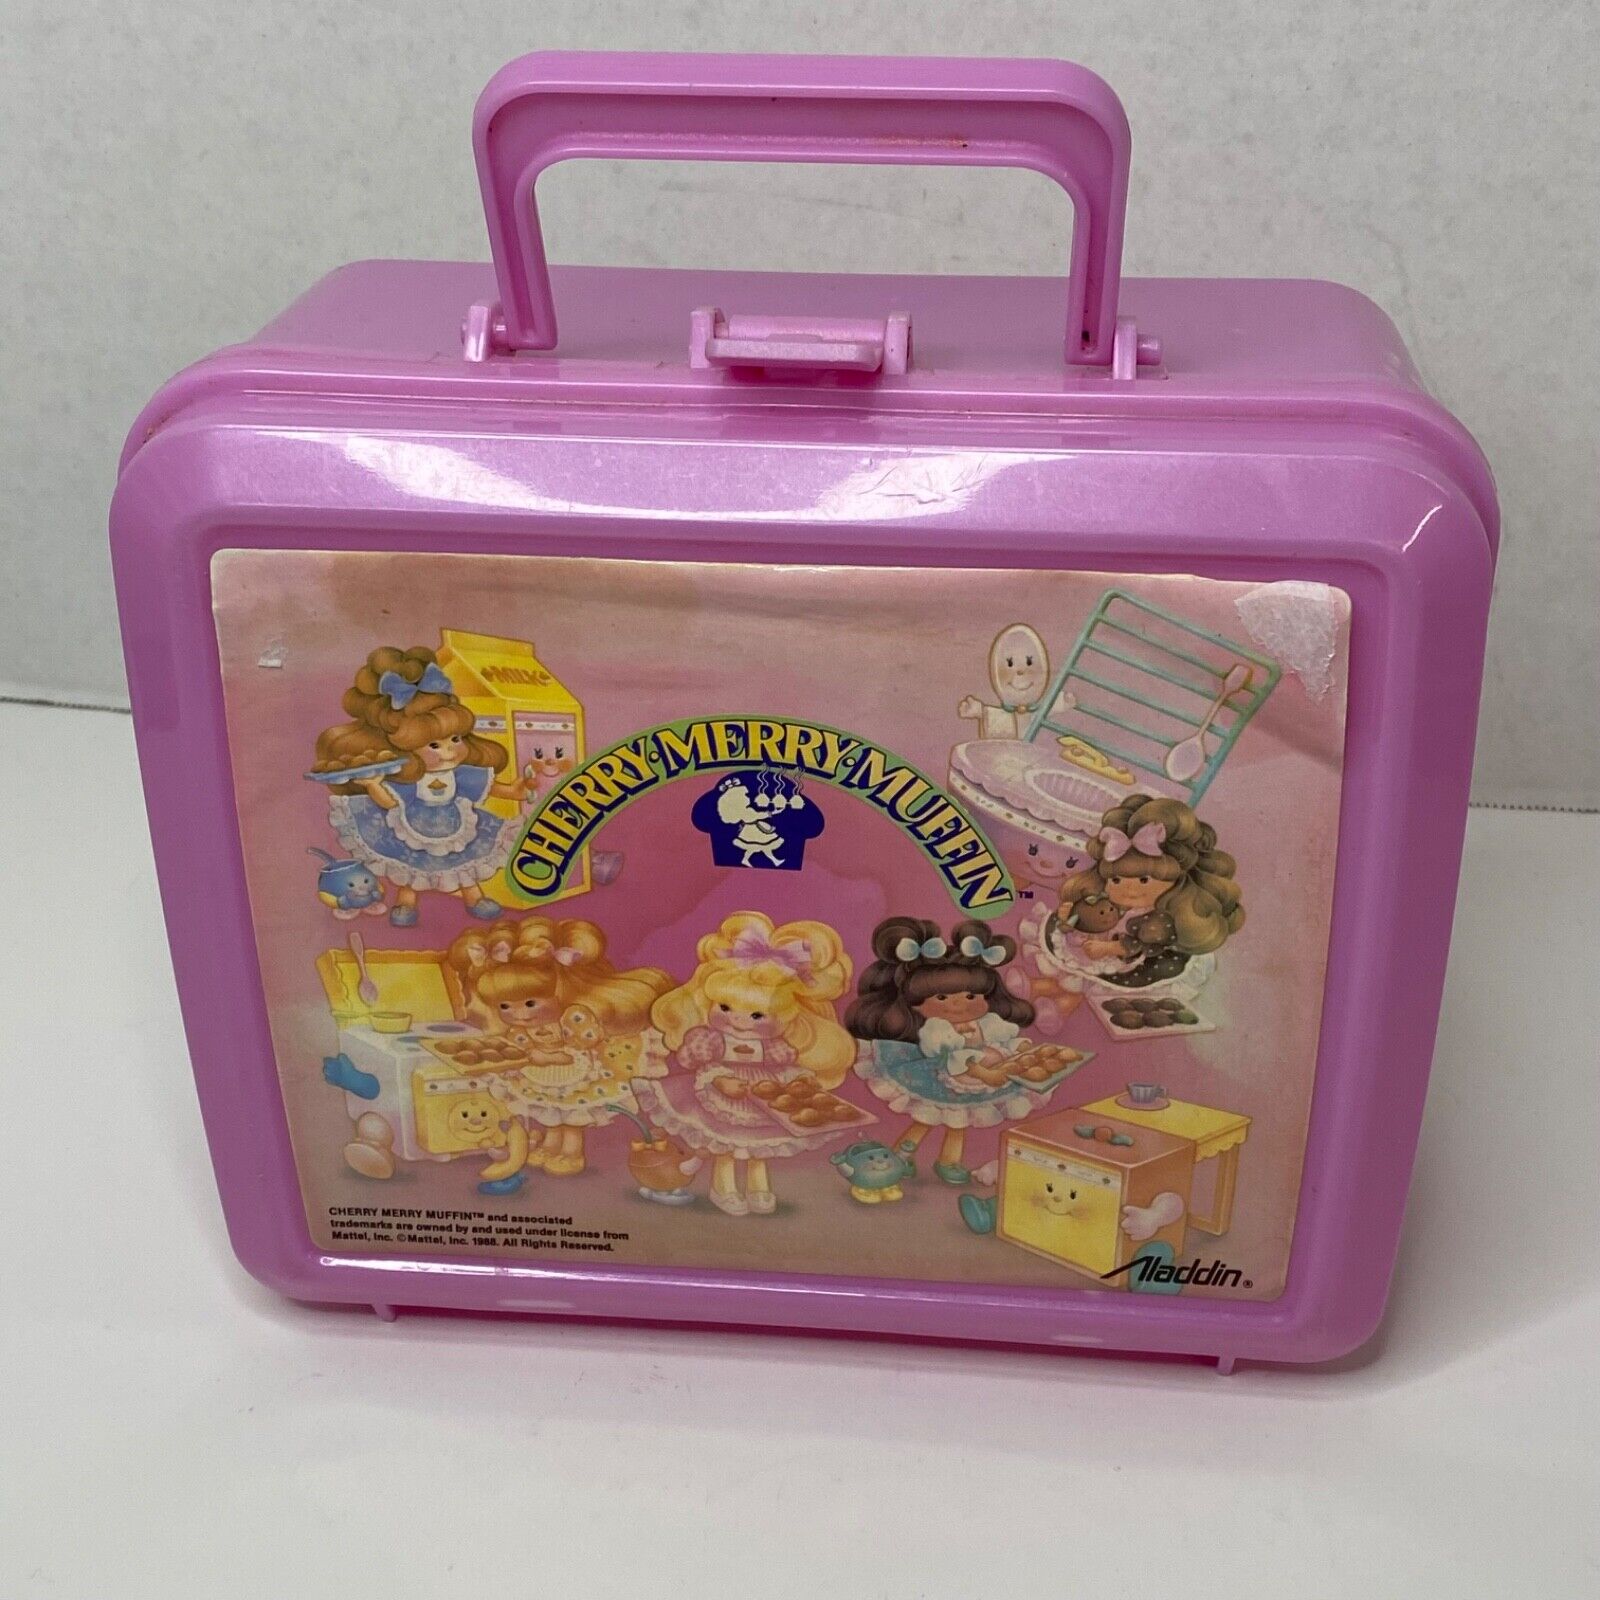 Vintage Pink Plastic Cherry Merry Muffin Alladin Lunchbox NO Thermos 1988